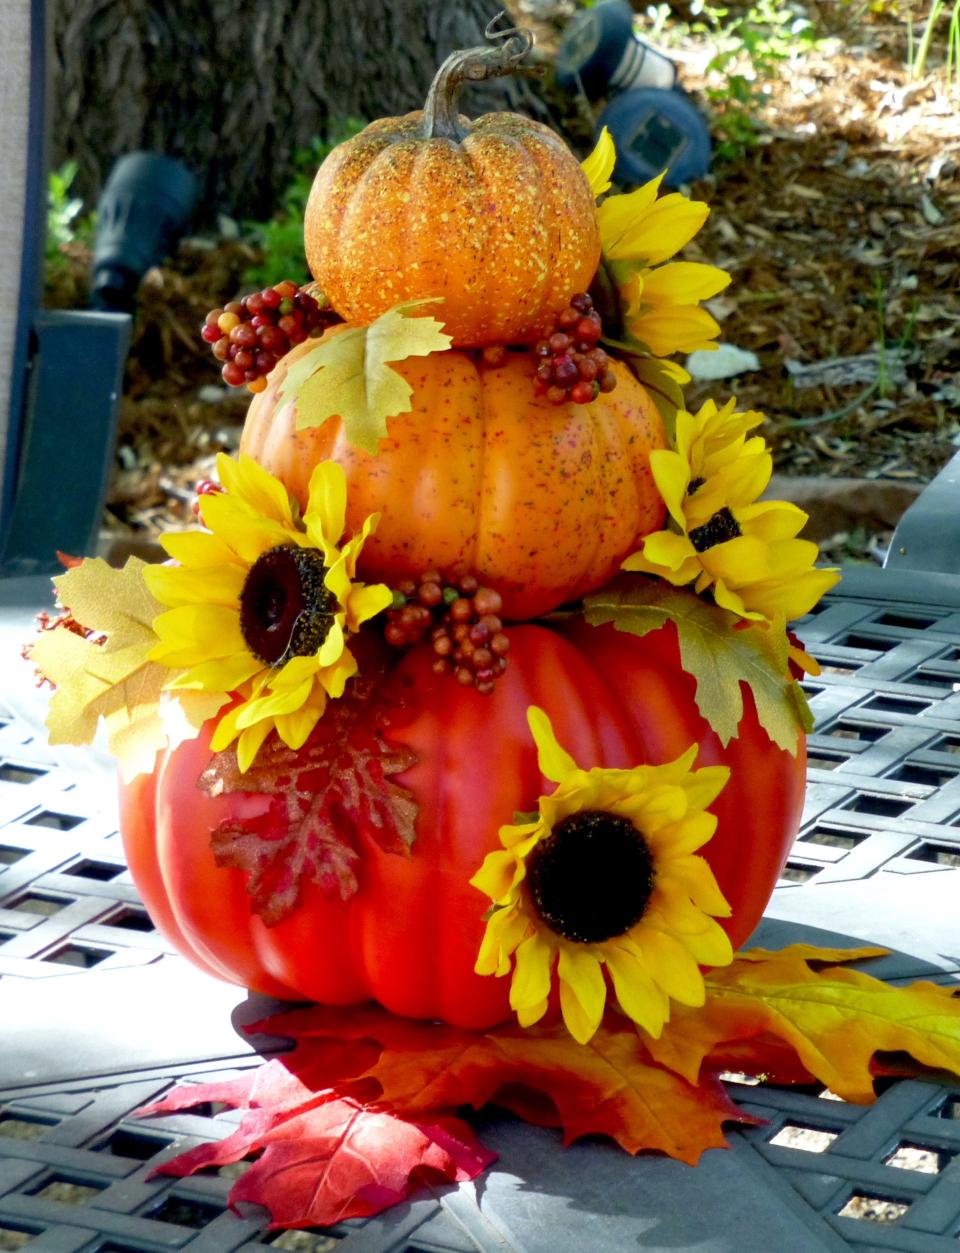 A showy pumpkin stack of three pumpkins of graduated sizes ornamented with seasonal sunflowers, berries, and fall colored leaves make an eye-catching centerpiece.